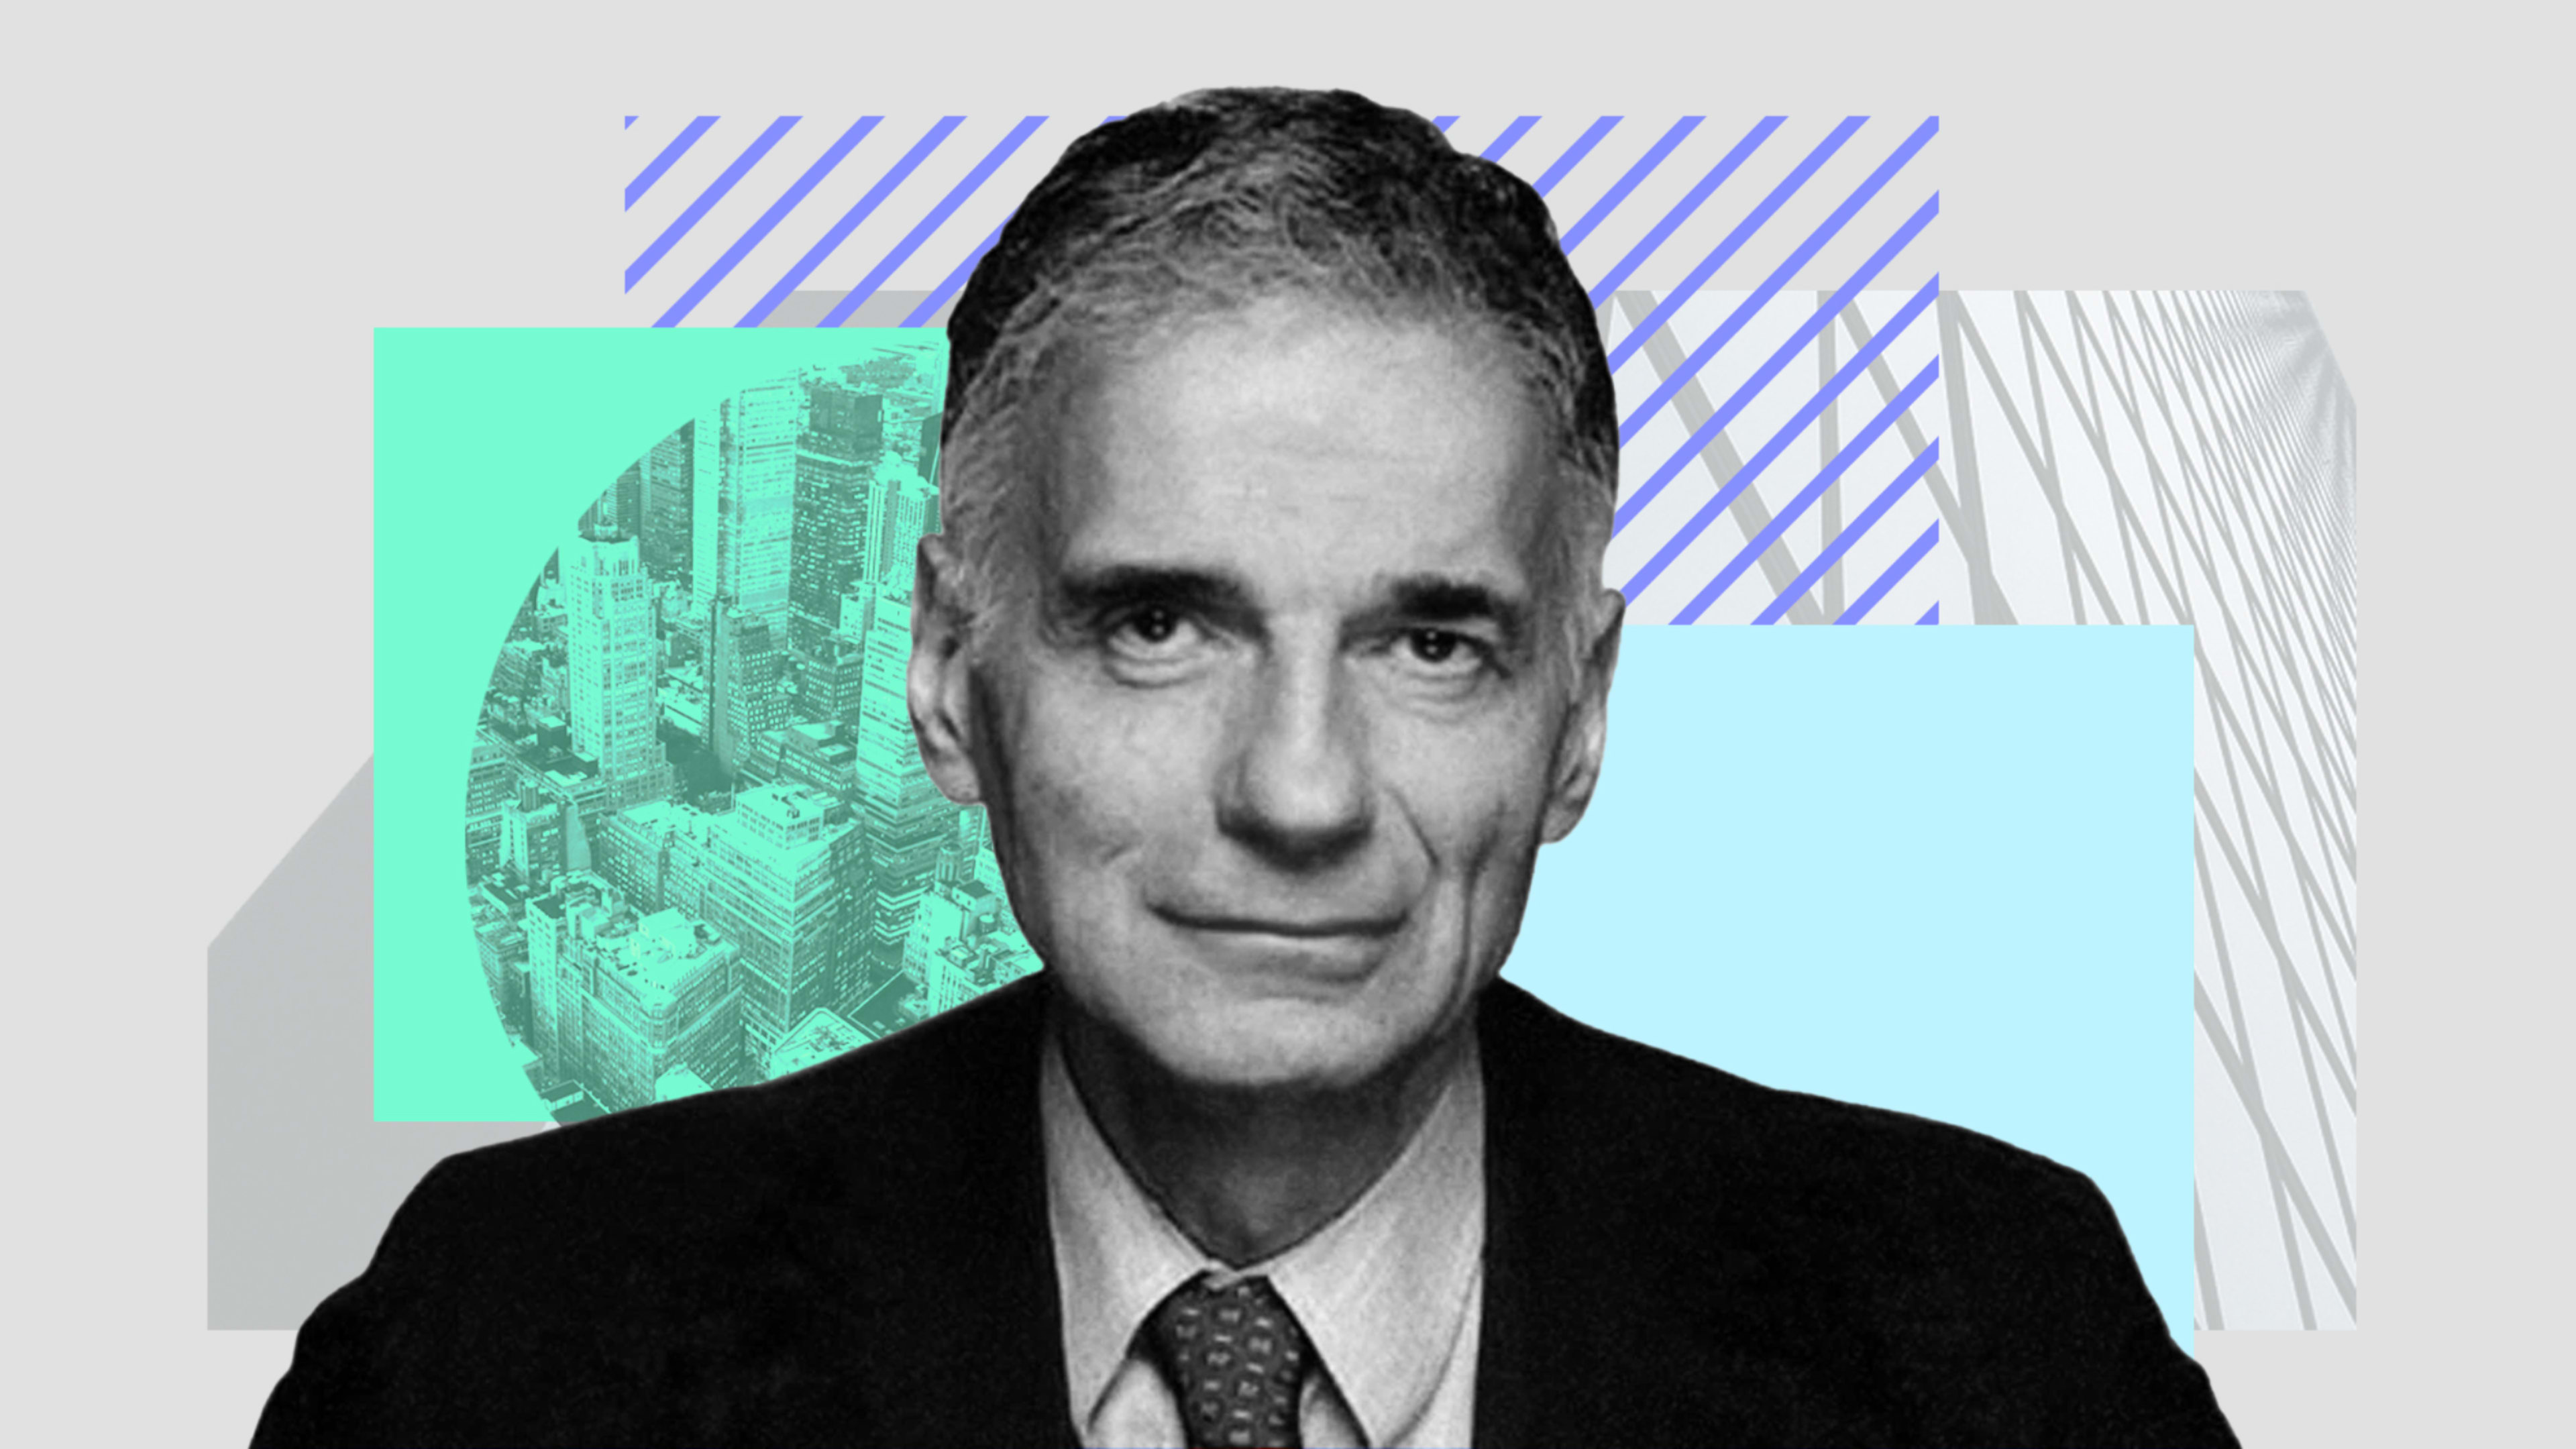 Ralph Nader says he is not antibusiness